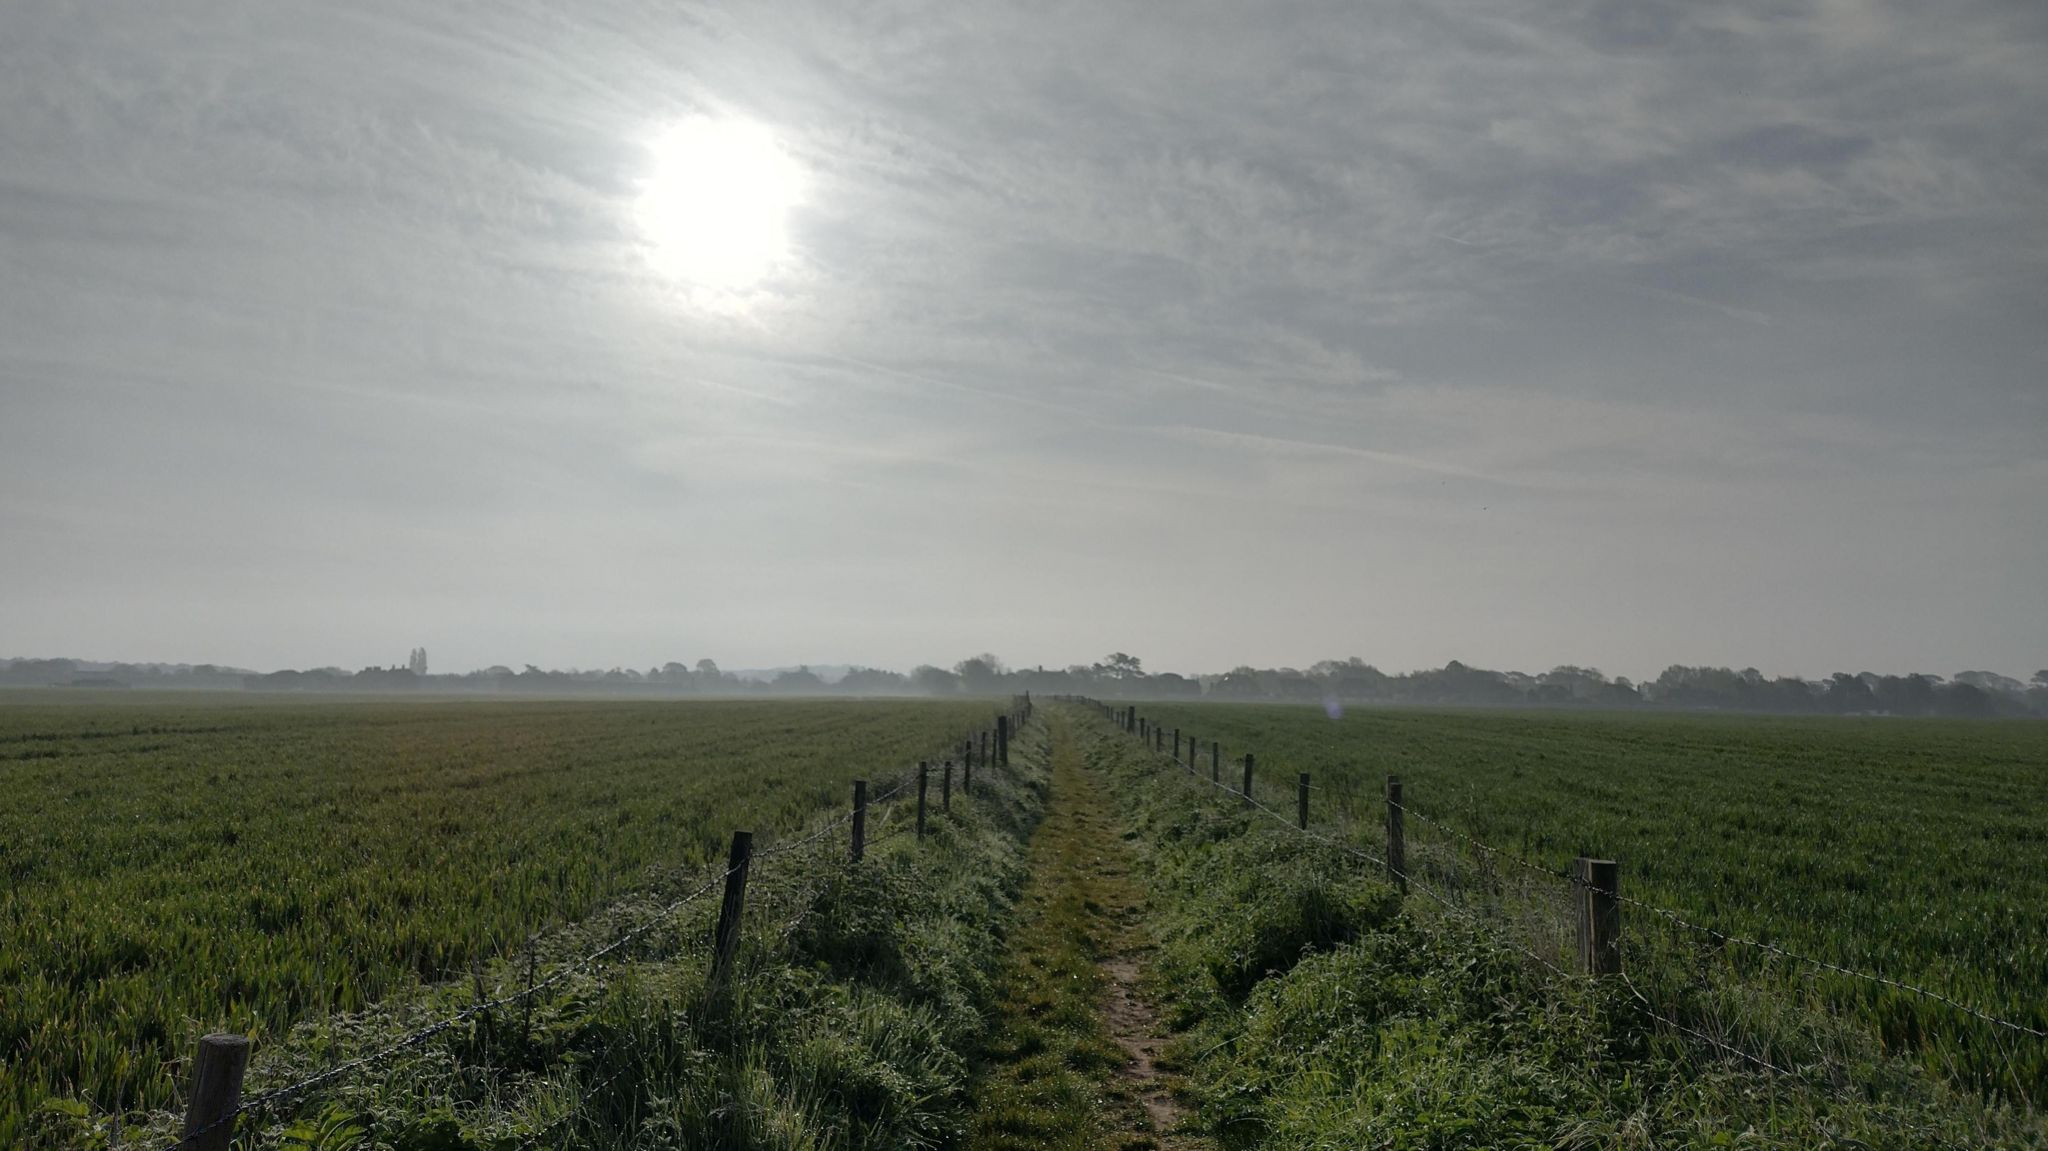 Photograph of a field with a footpath in the middle.  Lots of grey clouds but a bright sun is visible through the cloud.